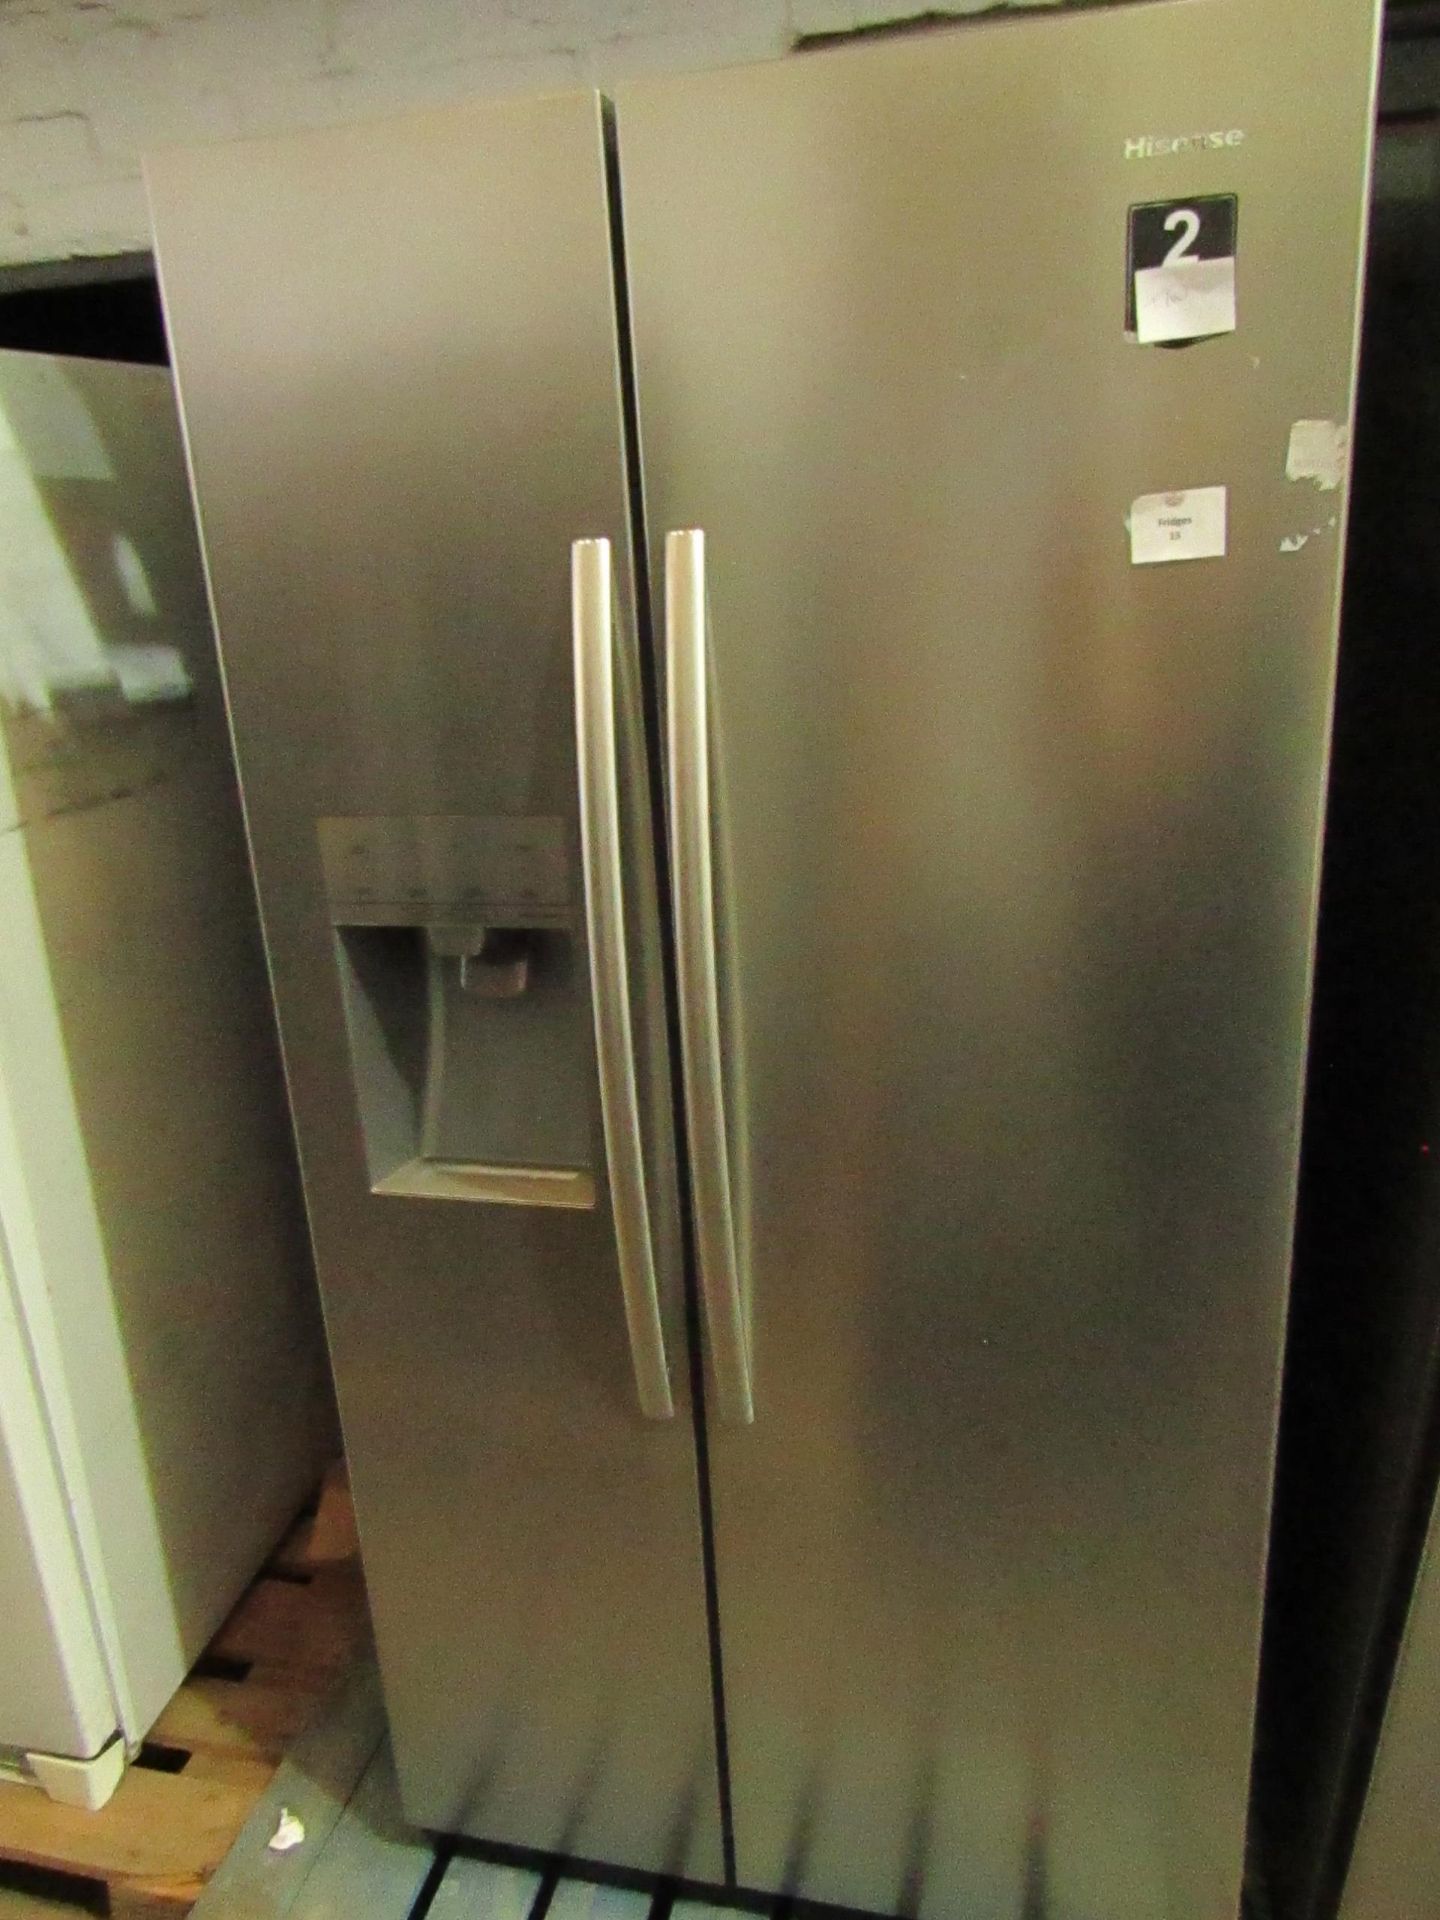 Hisense American fridge Freezer with water/ice dispenser, tested working for coldness in bboth